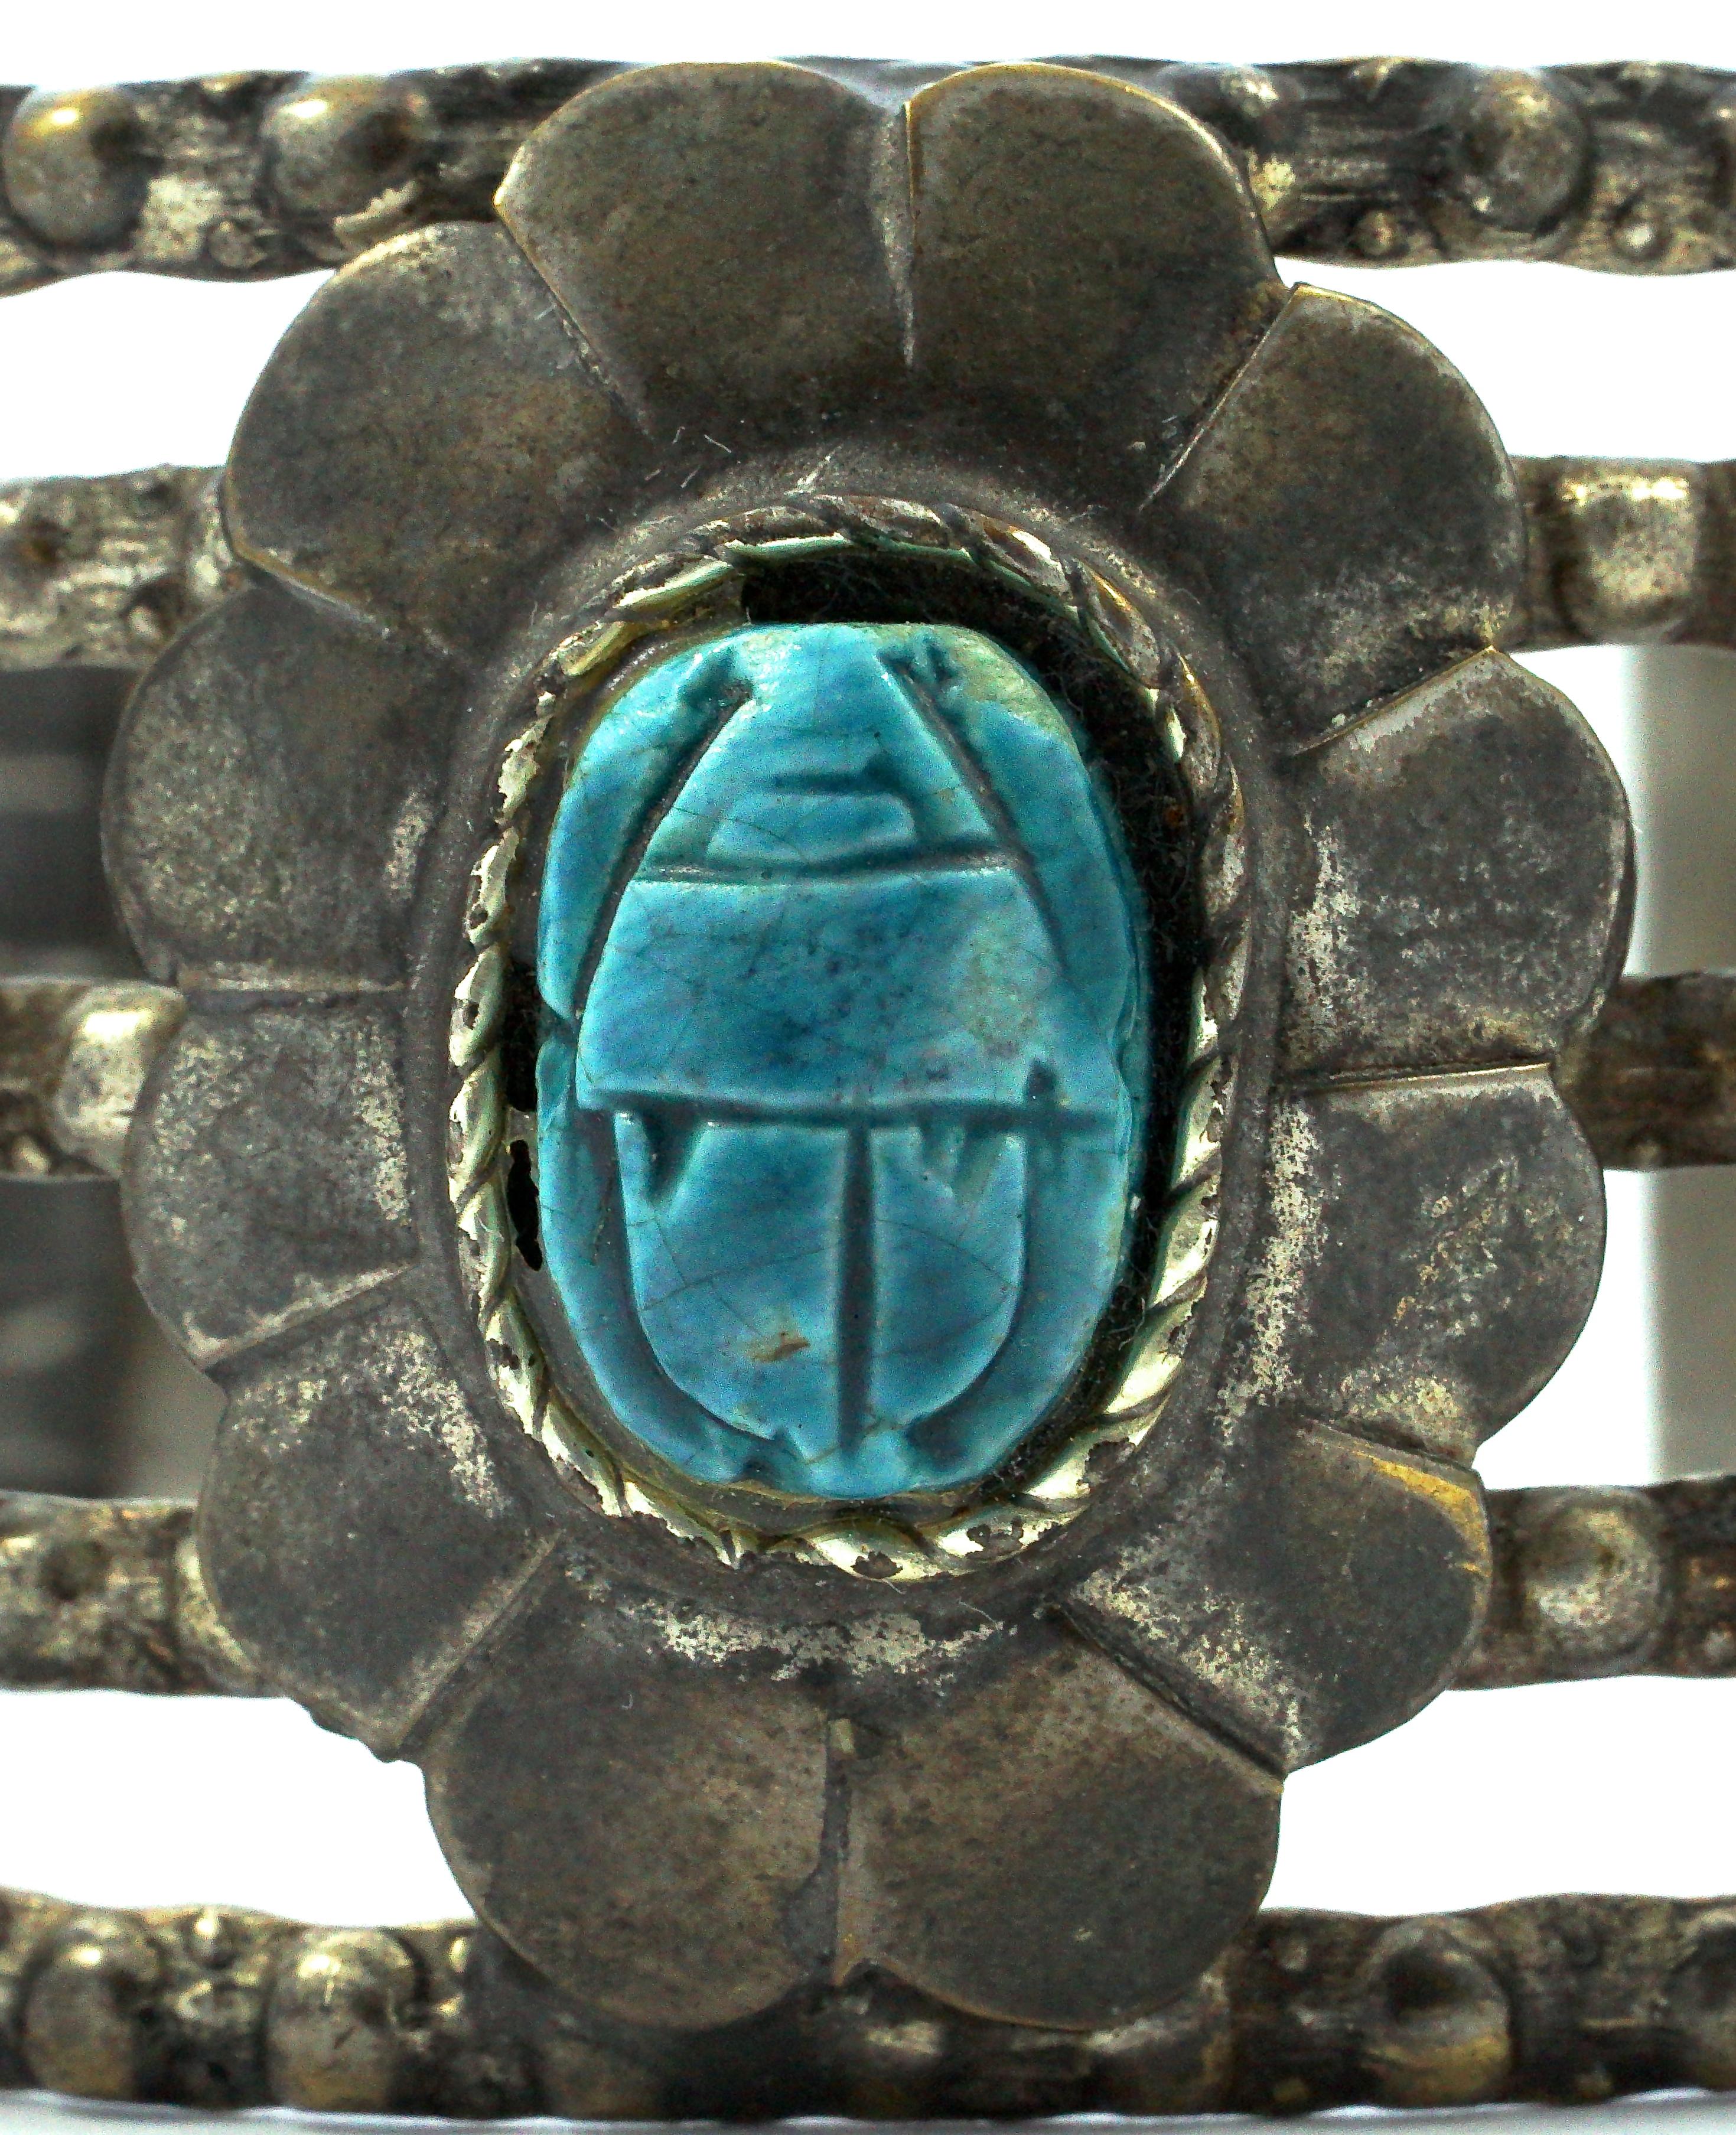 Wonderful silver tone Egyptian revival cuff bangle bracelet, with turquoise blue faience scarabs, in Art Deco style design rope twist settings. The four strand band is designed with small domes. Measuring inside diameter 6.1cm / 2.4 inches, by